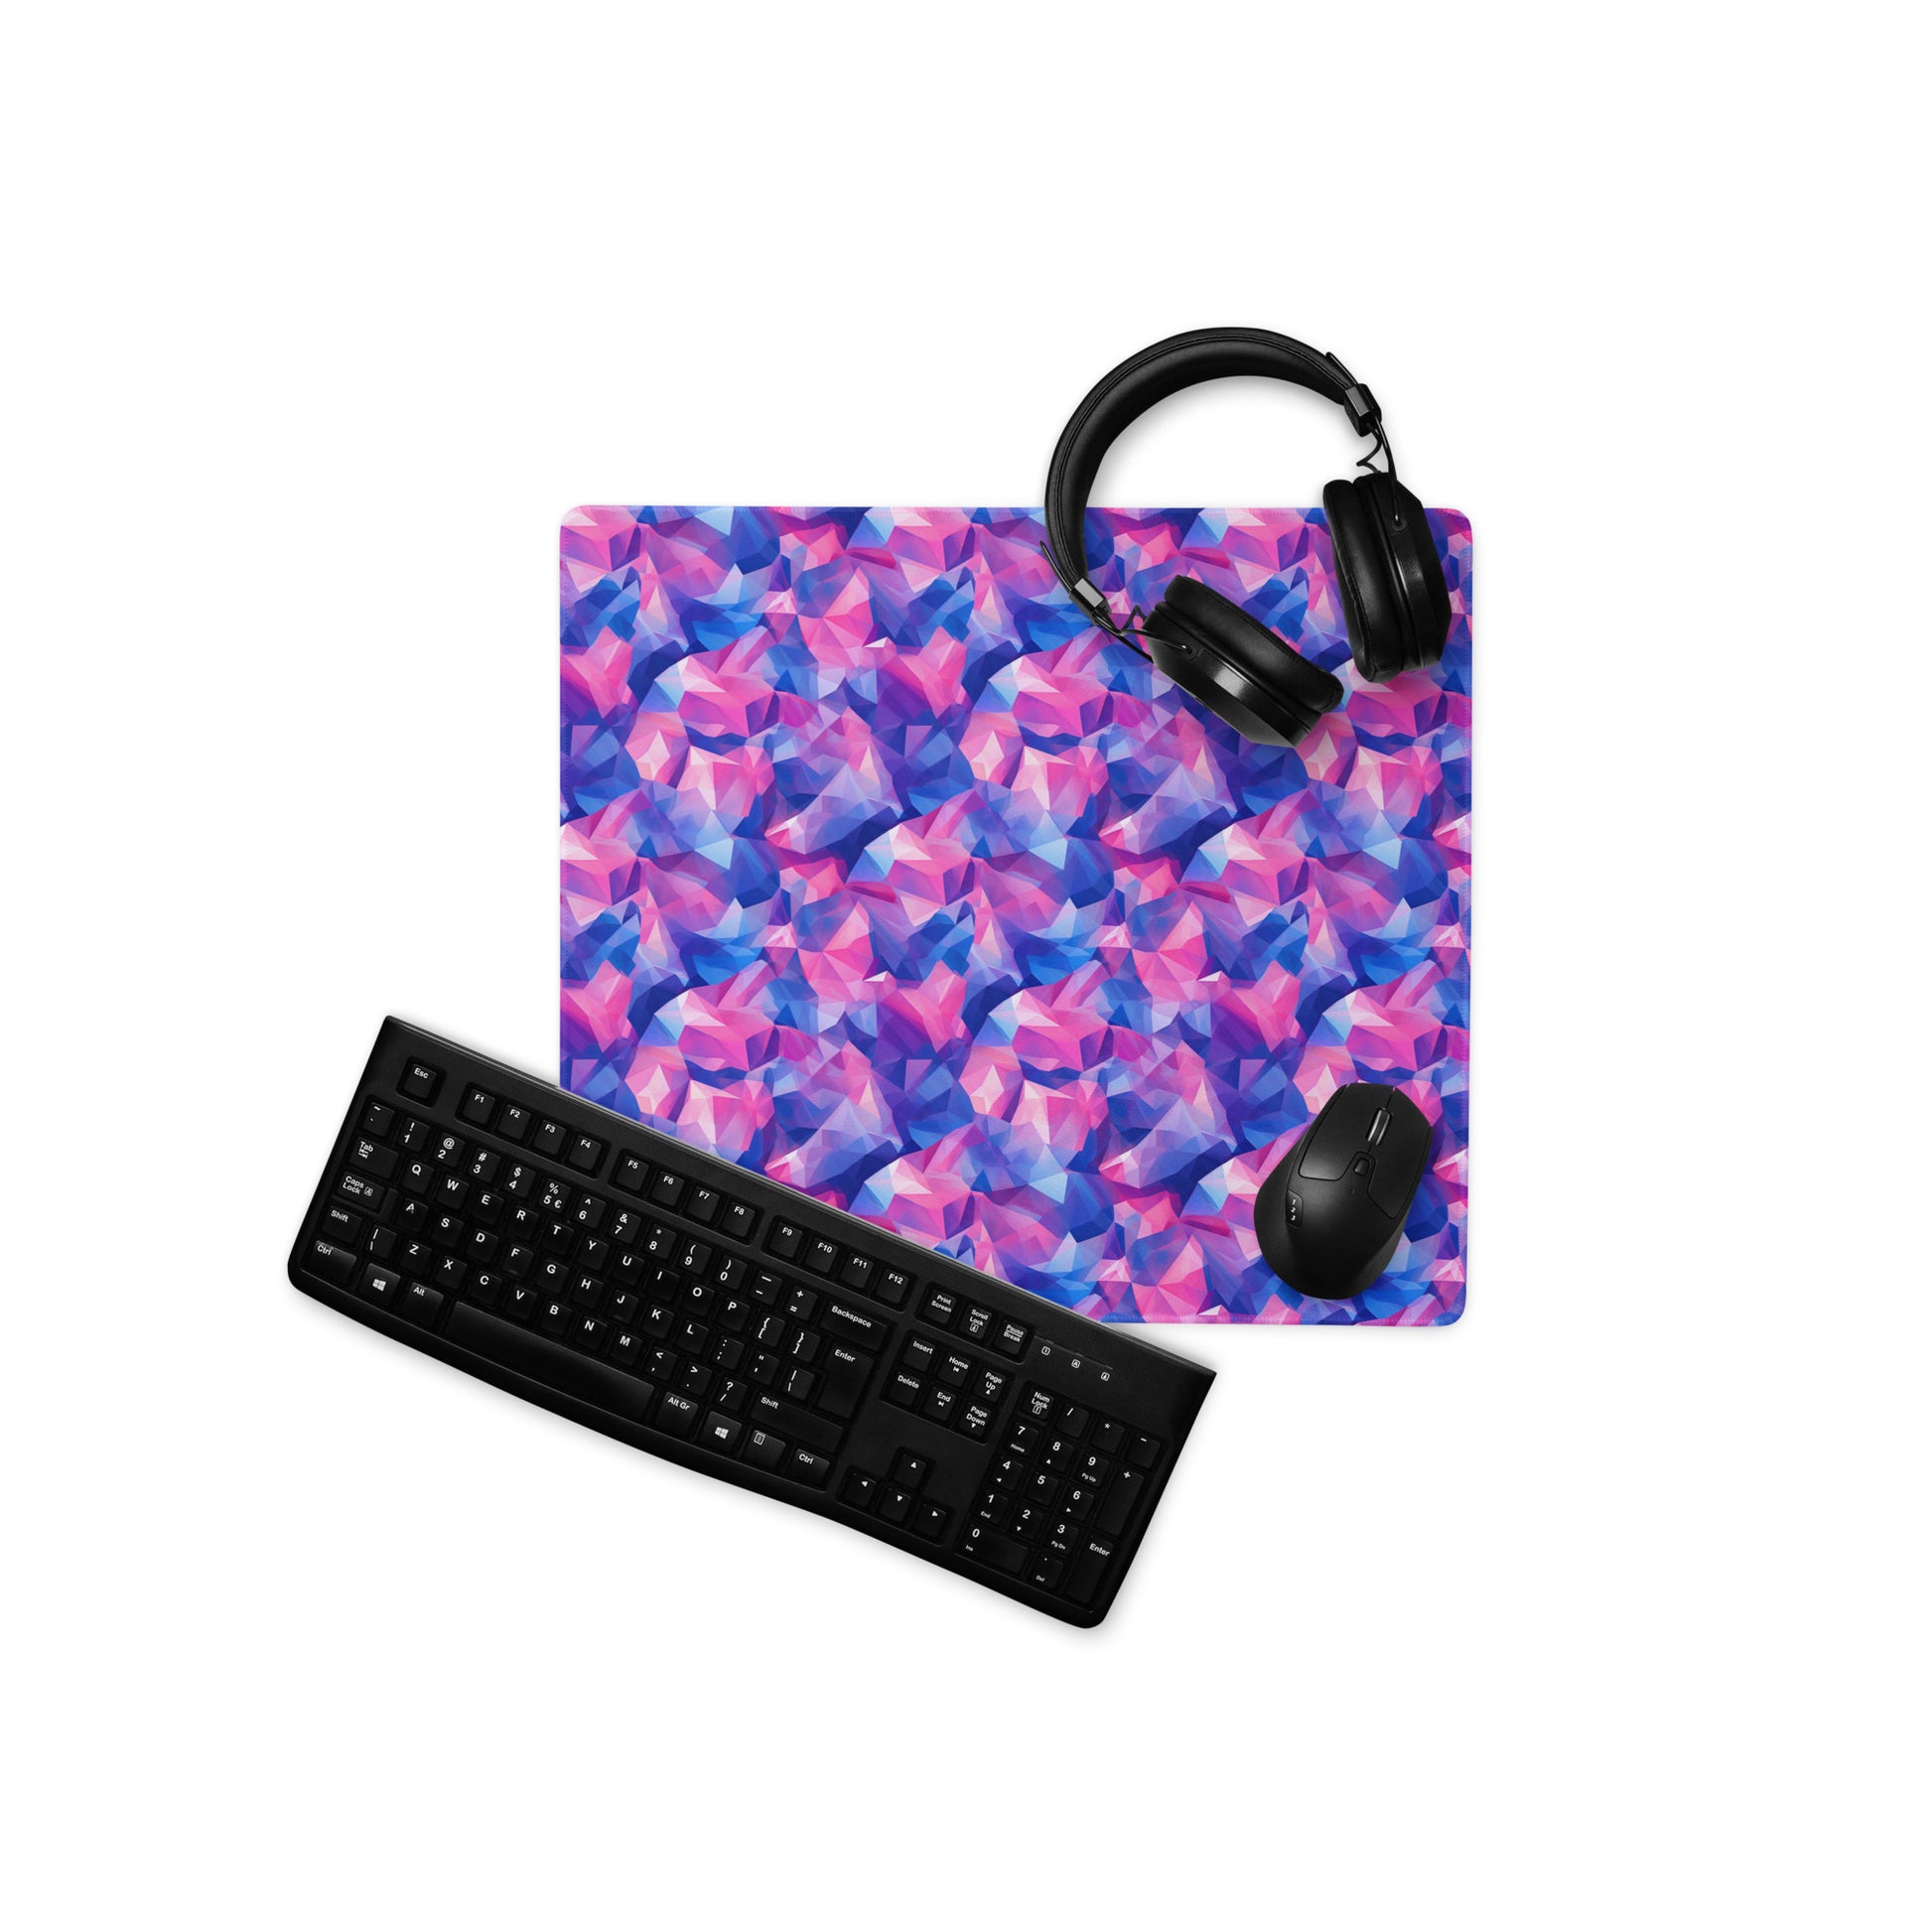 An 18" x 16" gaming desk pad with pink and blue crystals. A keyboard, mouse, and headphones sit on it.